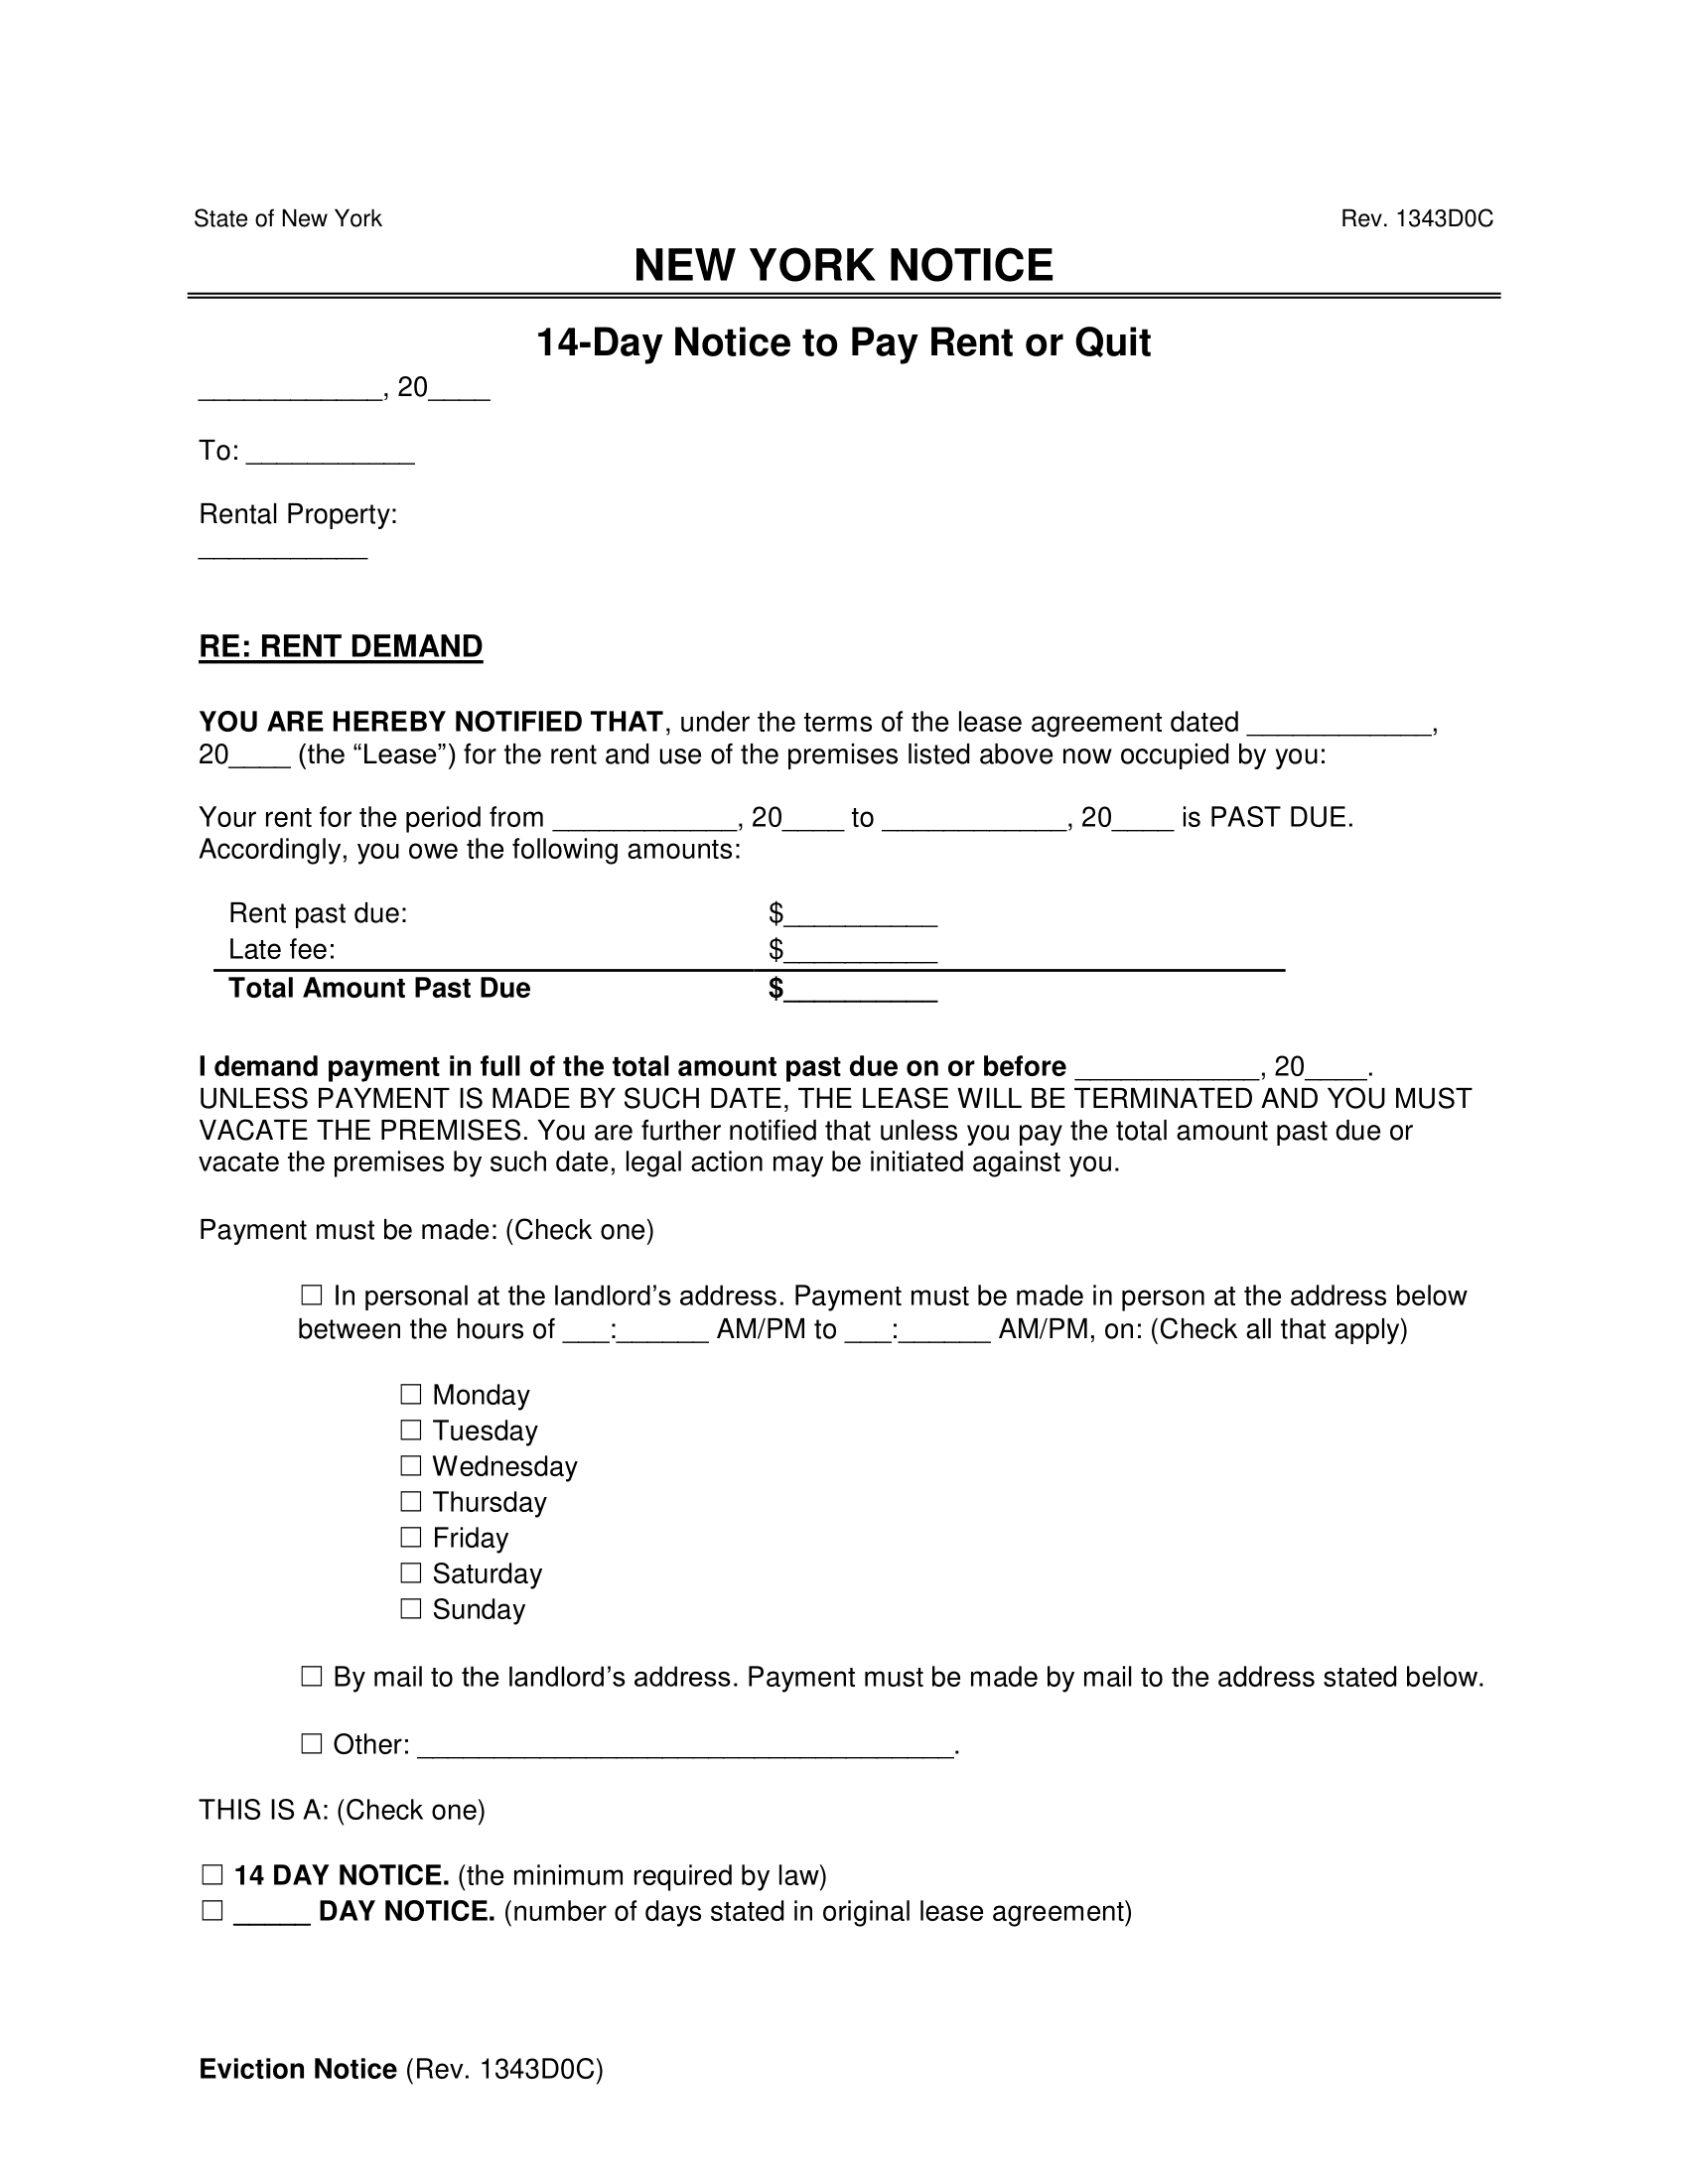 New York 14-Day Notice to Quit | Non-Payment of Rent